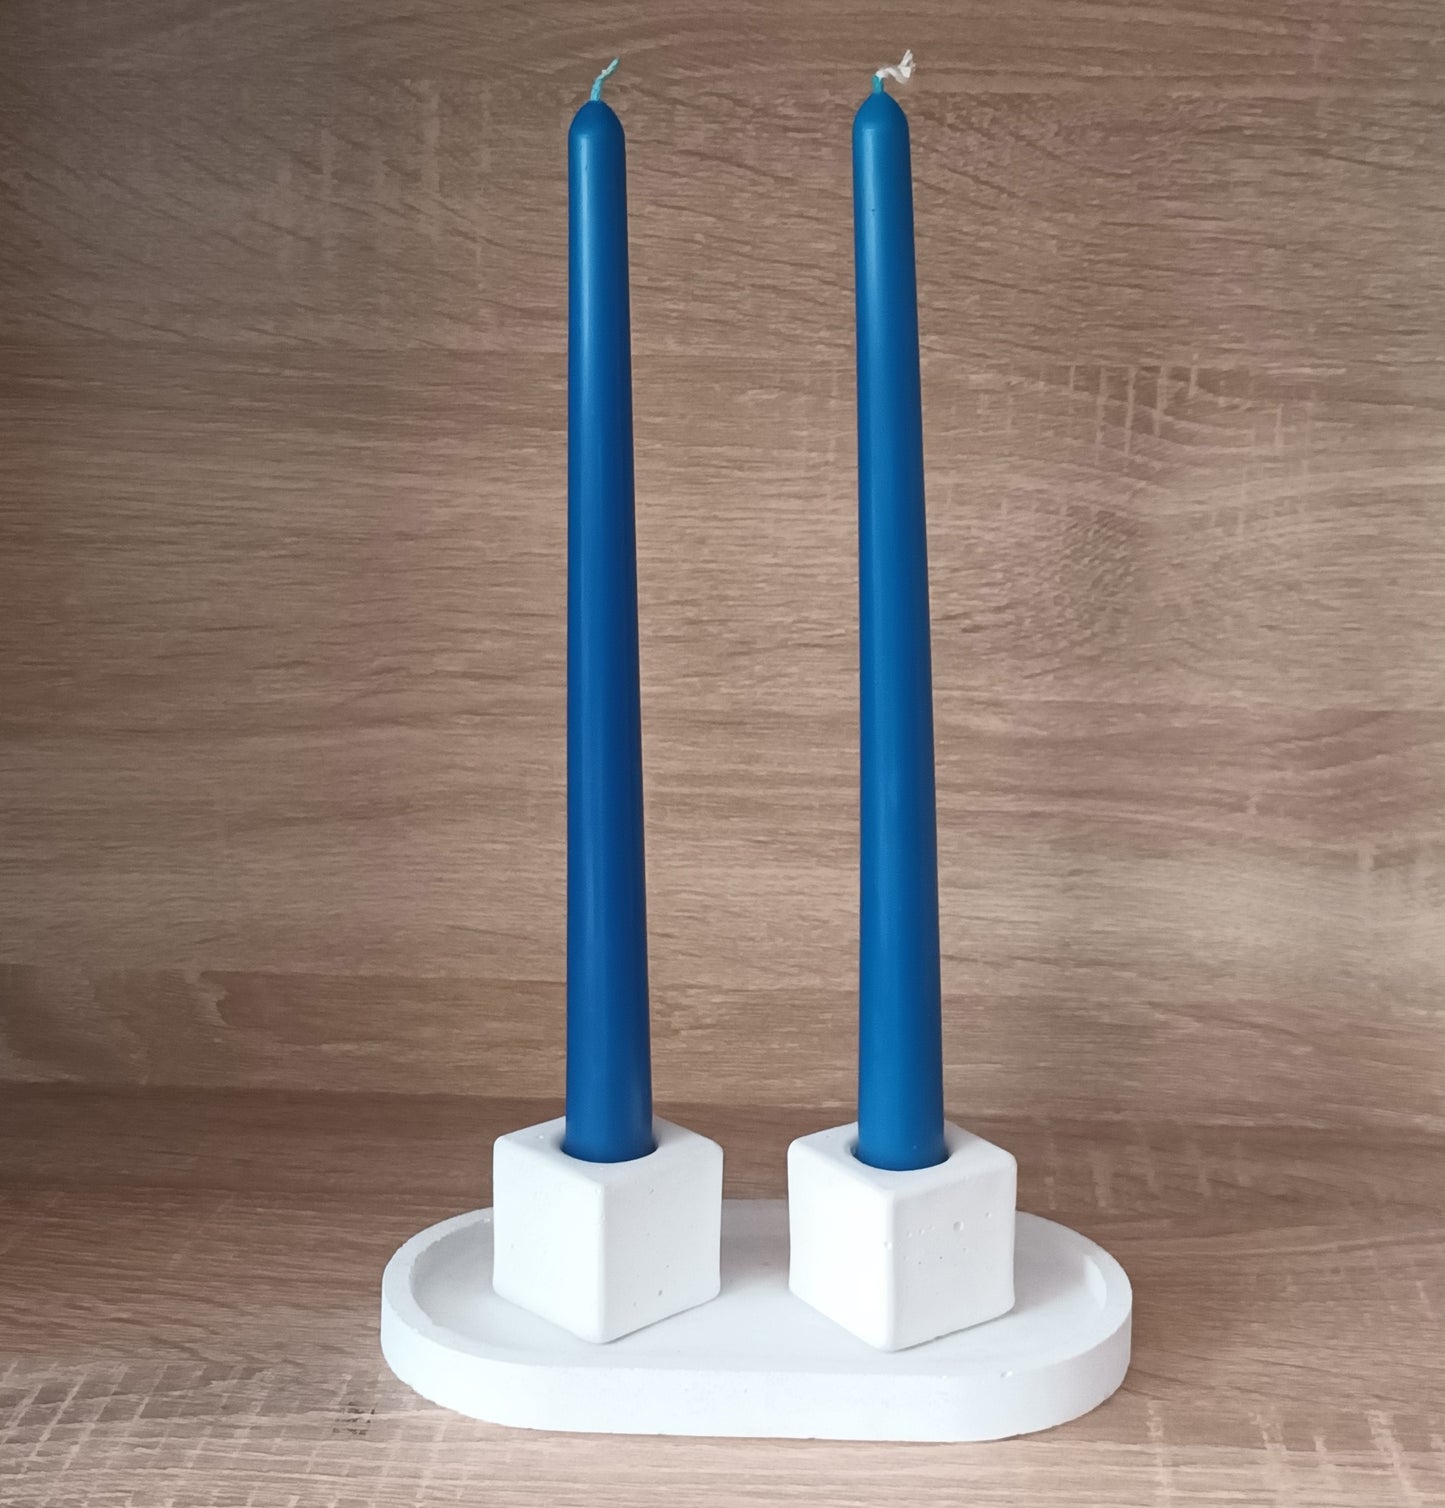 This is a picture of 10" Beeswax Taper Candles Sticks - Colorful Dinner Candles for Wedding and Modern Home Decor